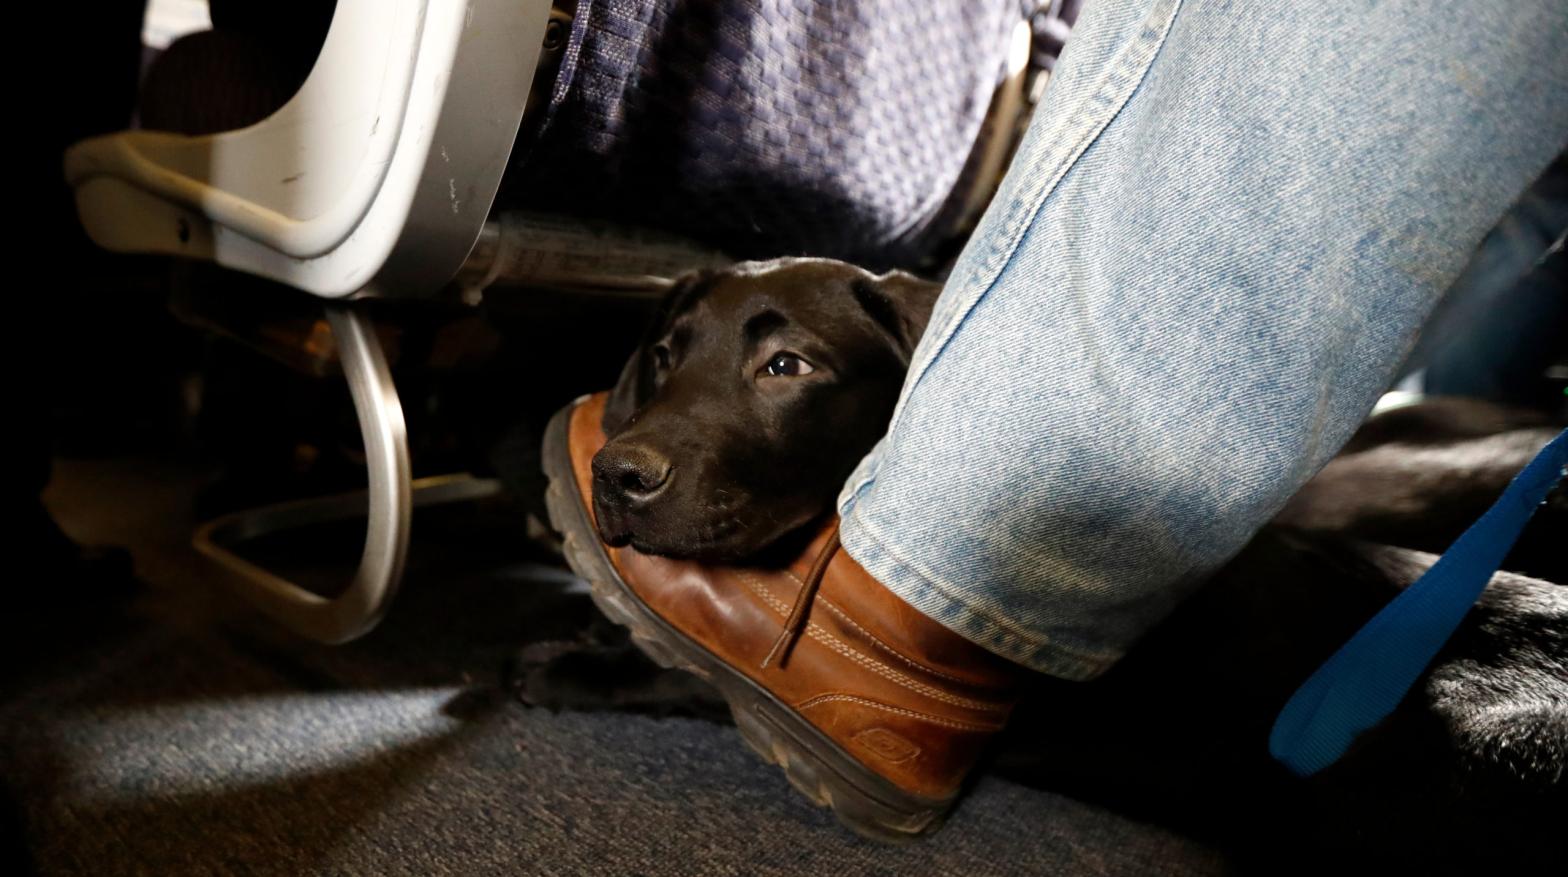 In this Saturday, April 1, 2017, file photo, a service dog named Orlando rests on the foot of its trainer, John Reddan, while sitting inside a United Airlines plane at Newark Liberty International Airport during a training exercise, in Newark, N.J. (Photo: Julio Cortez, AP)